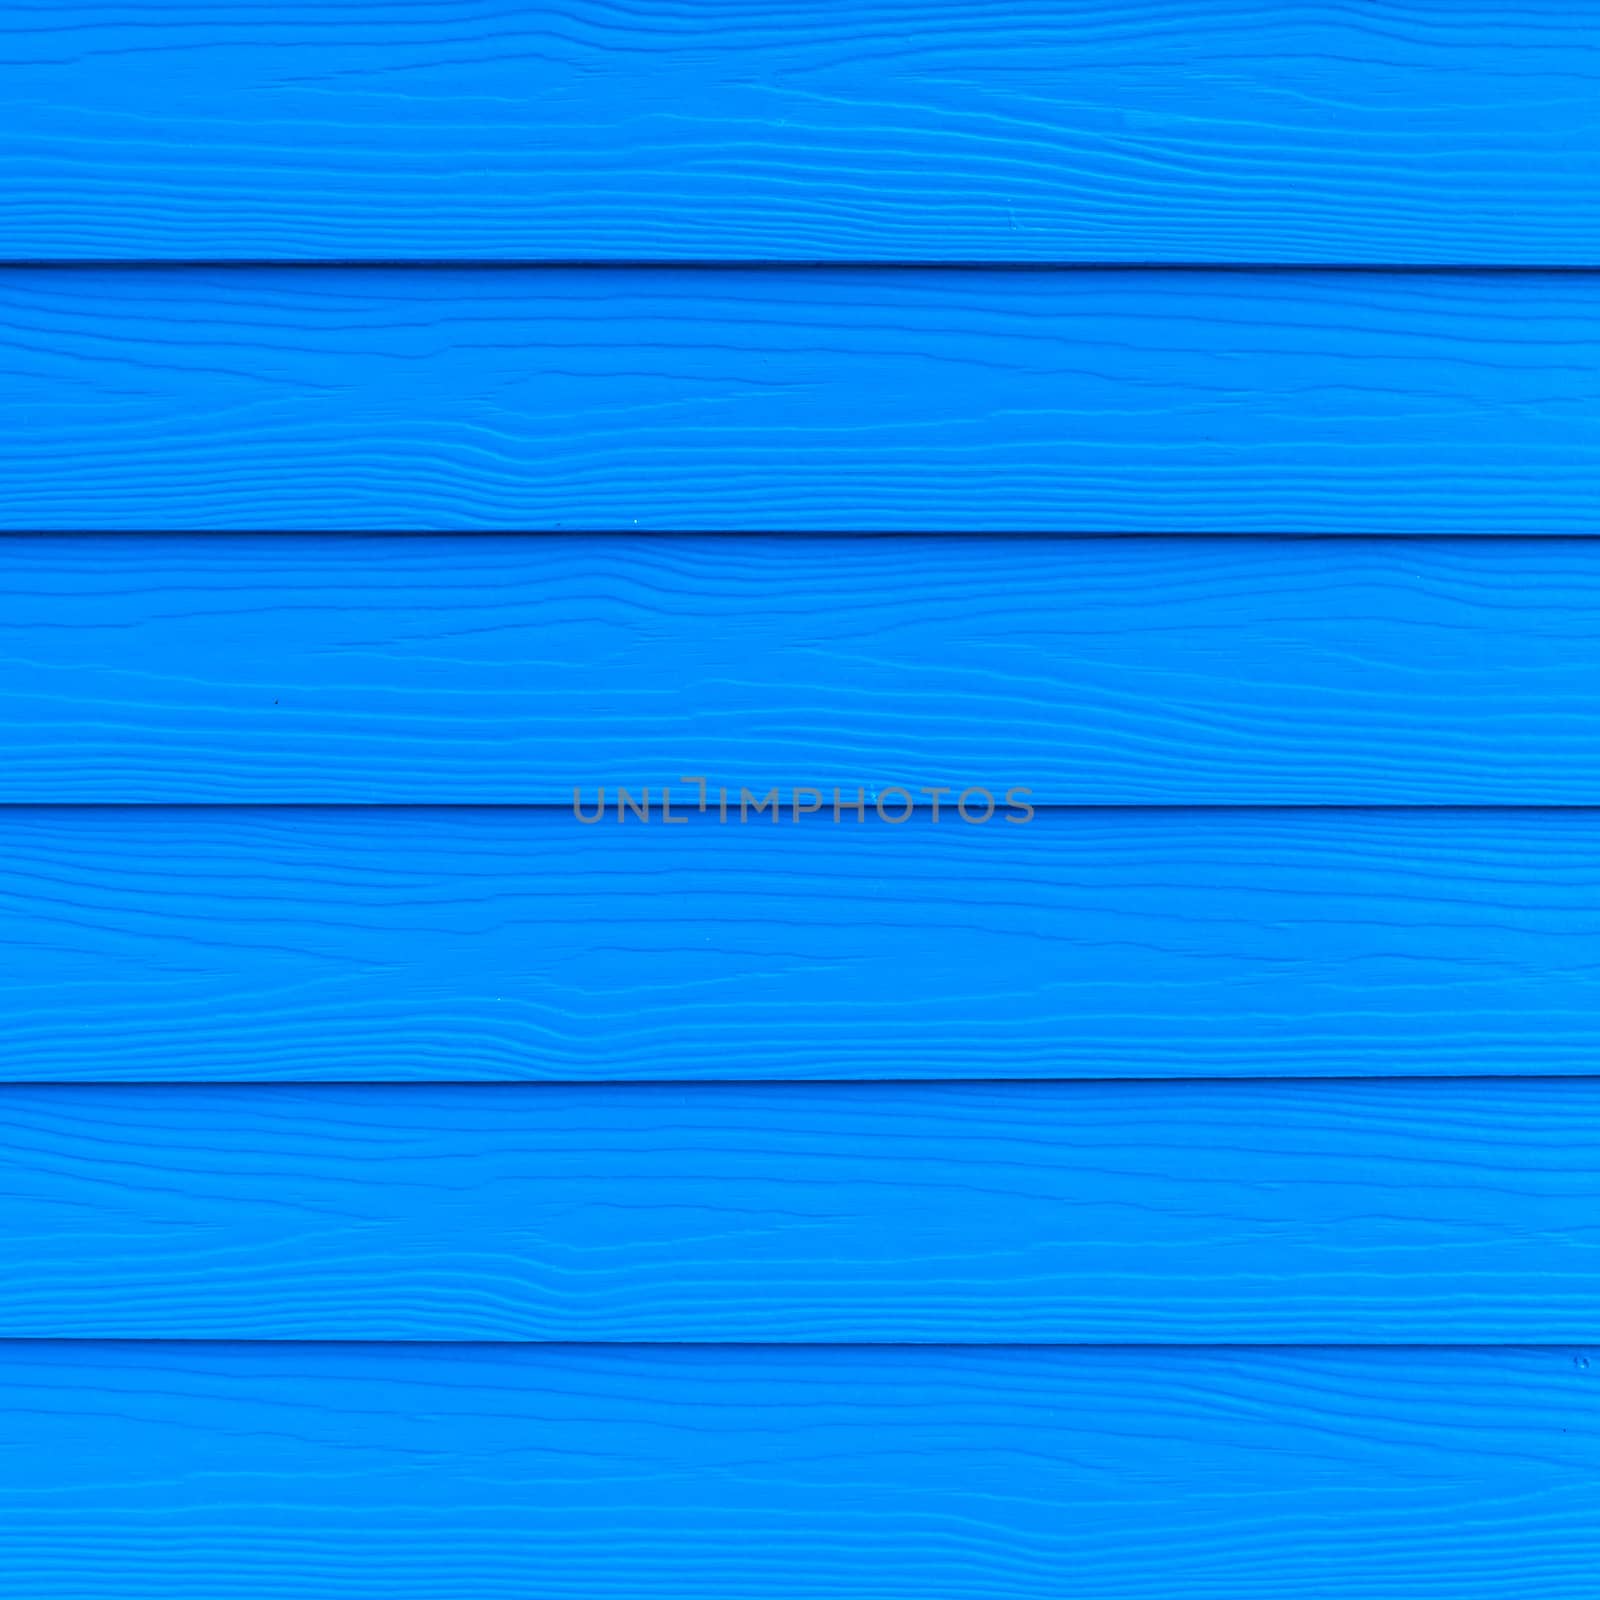 Scratched and dirty wood painted blue Wood plank texture backgro by nopparats